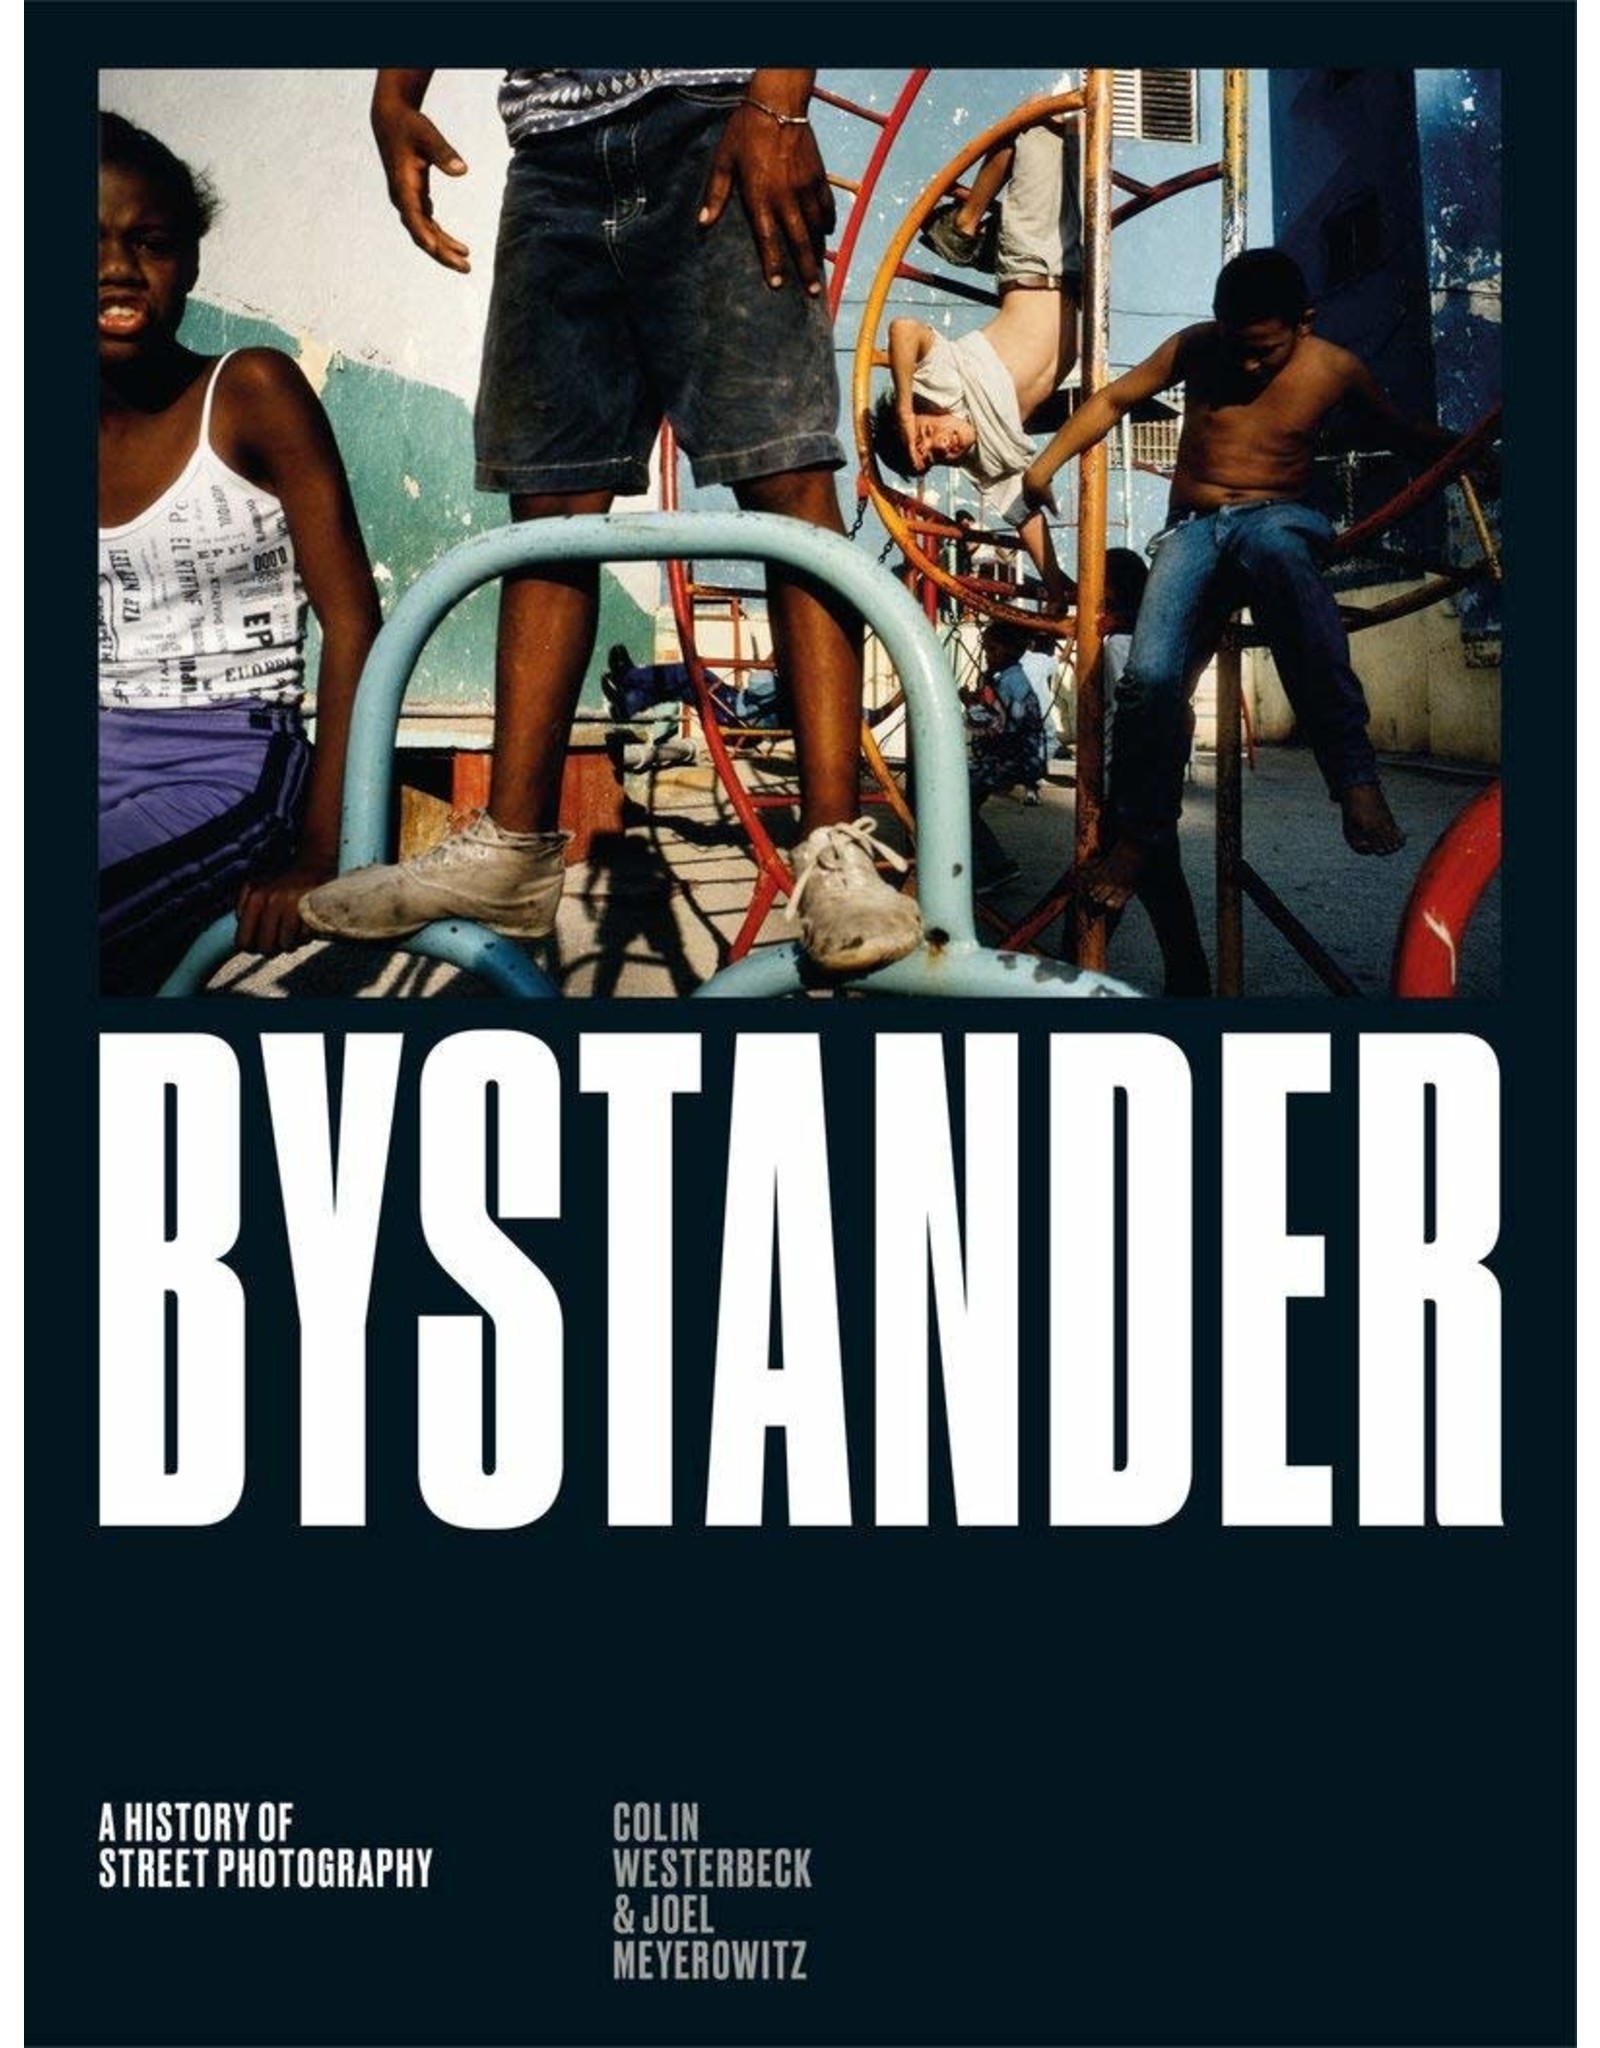 Bystander: A History of Street Photography